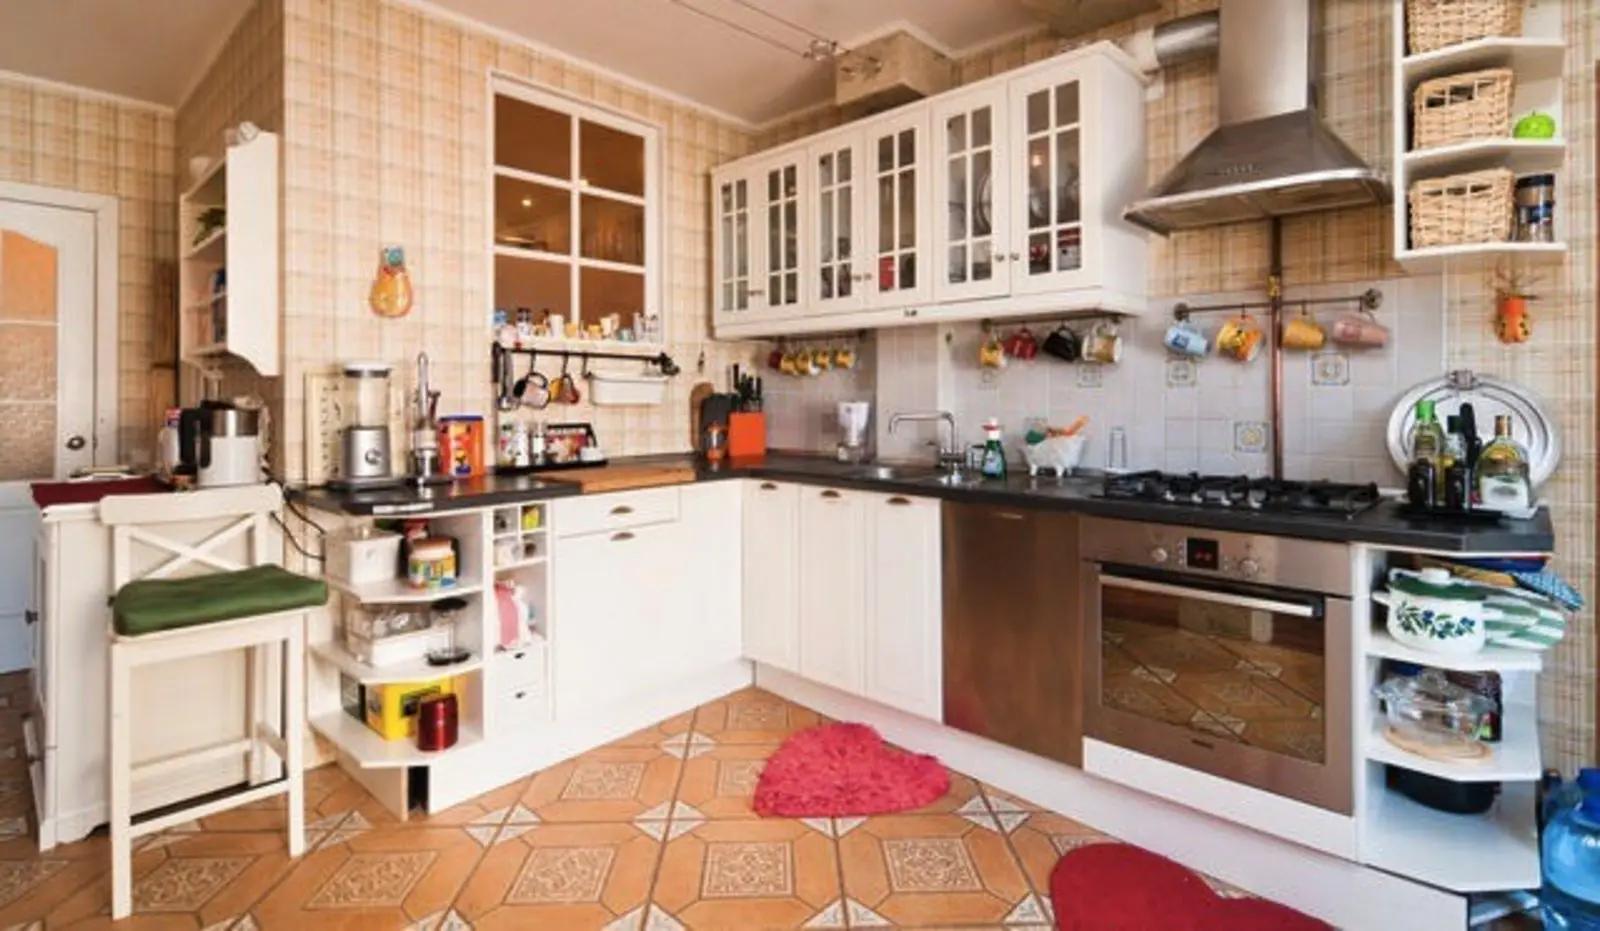 Kitchen in Home of Happyness - 1